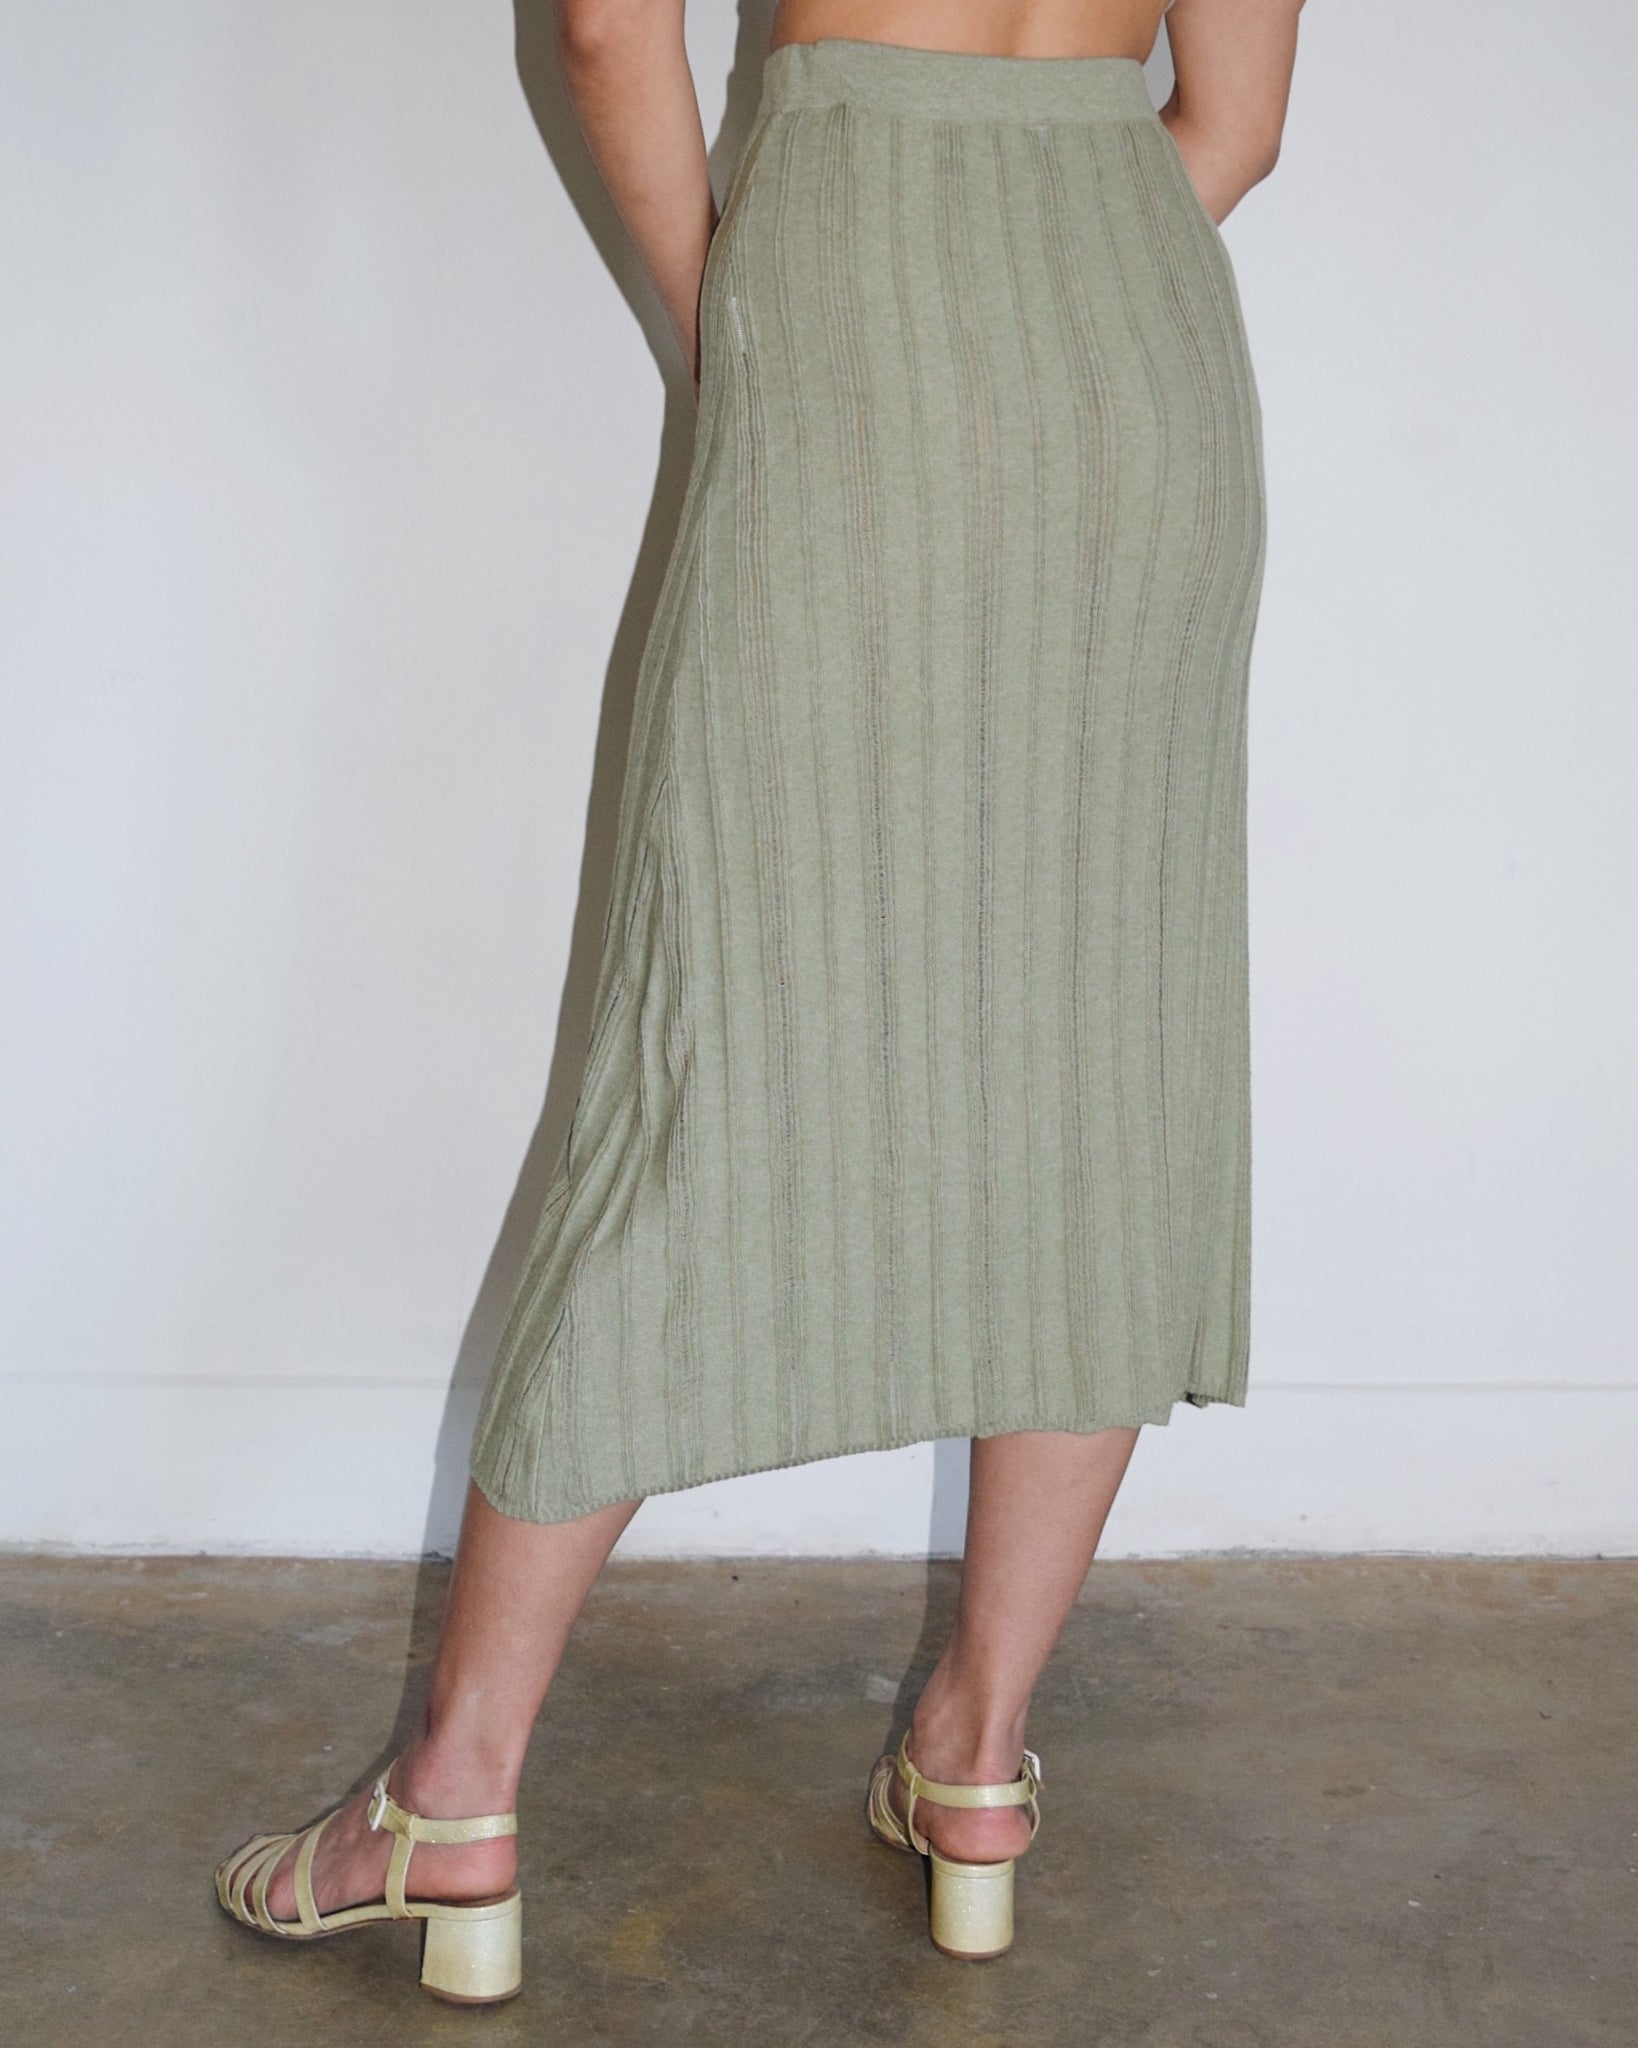 Noho Skirt in Sage